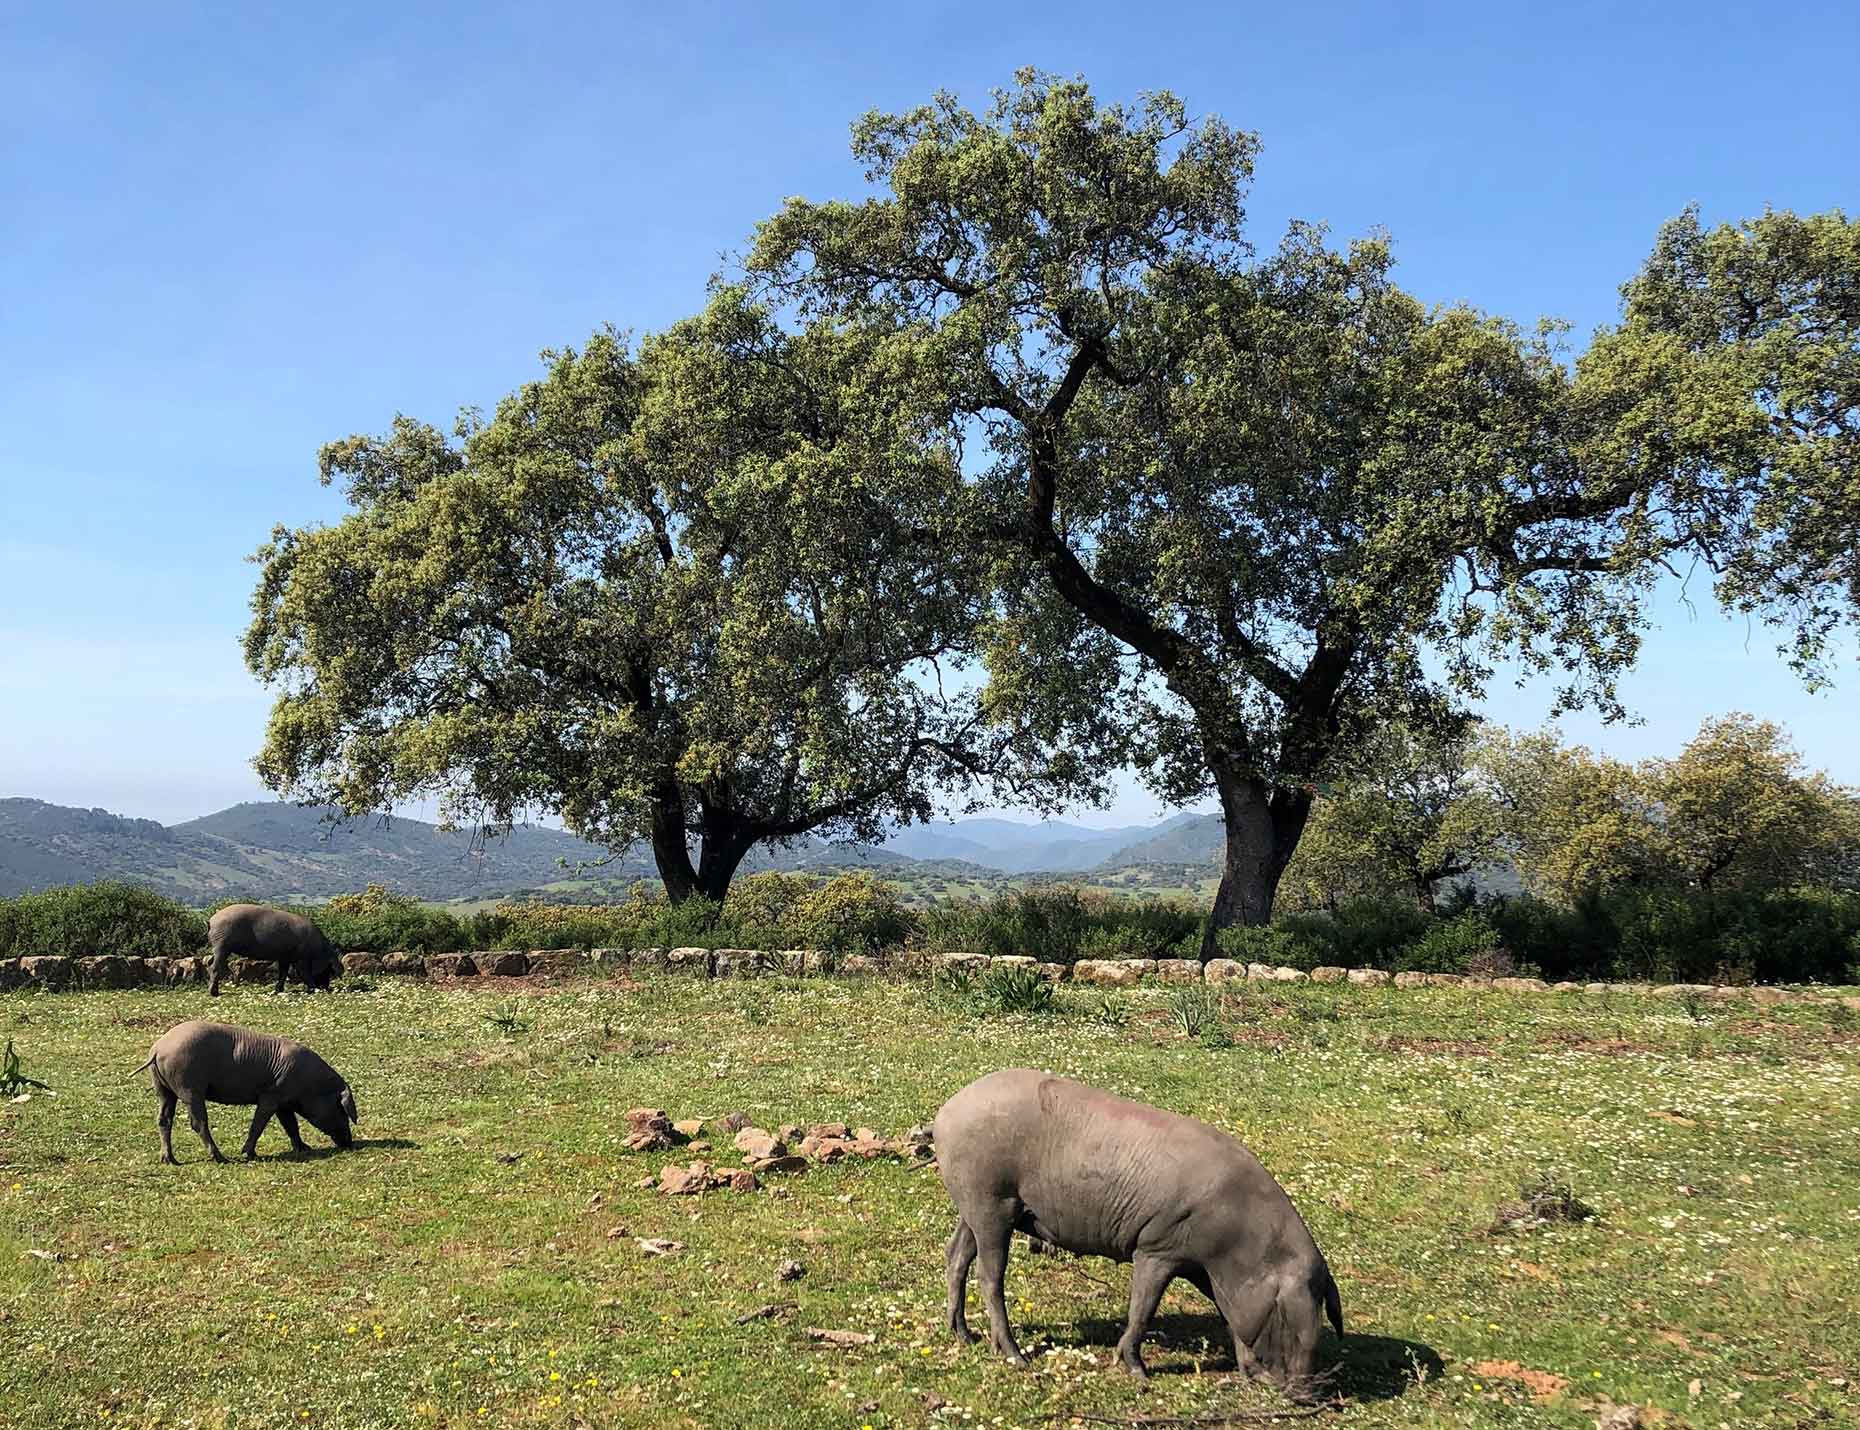 More pigs in the Spanish dehesa (Image: Daisy Meager)